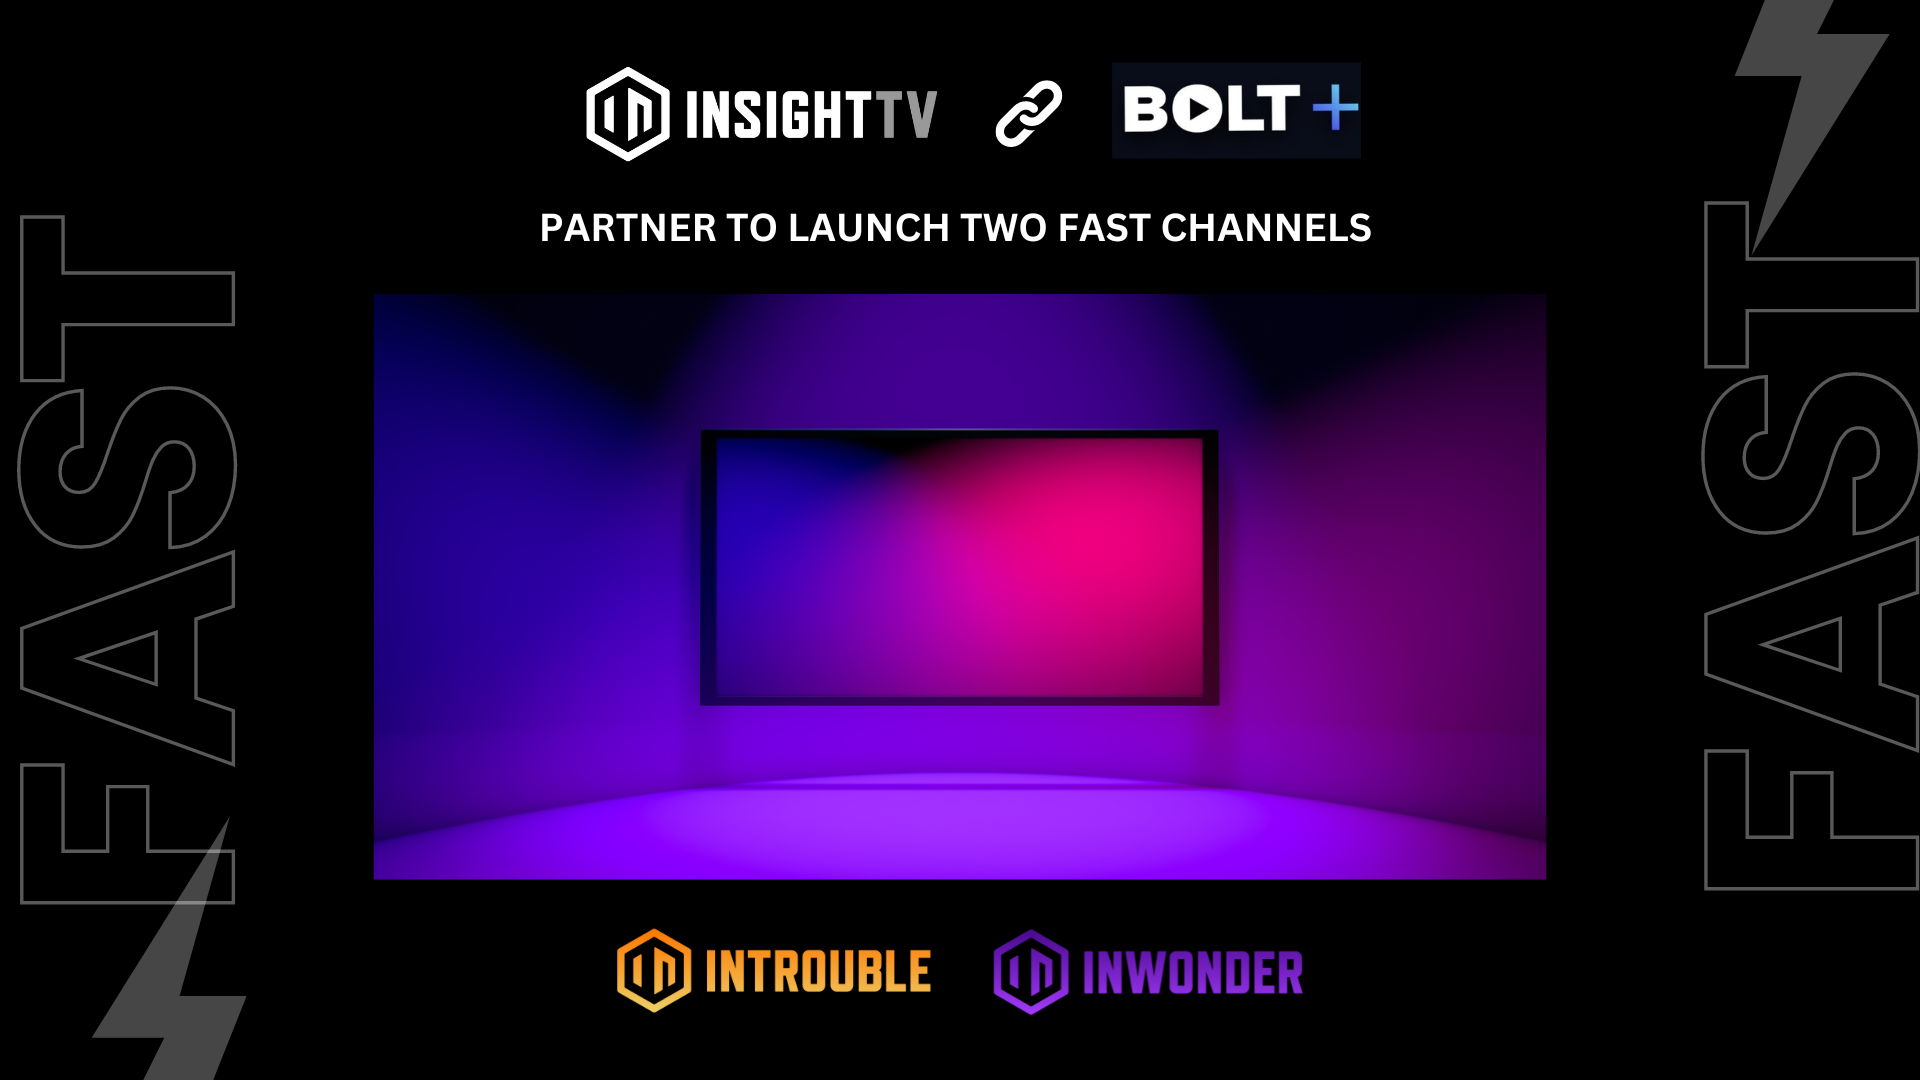 INSIGHT TV and Bolt+ Forge Partnership to Redefine Digital Entertainment